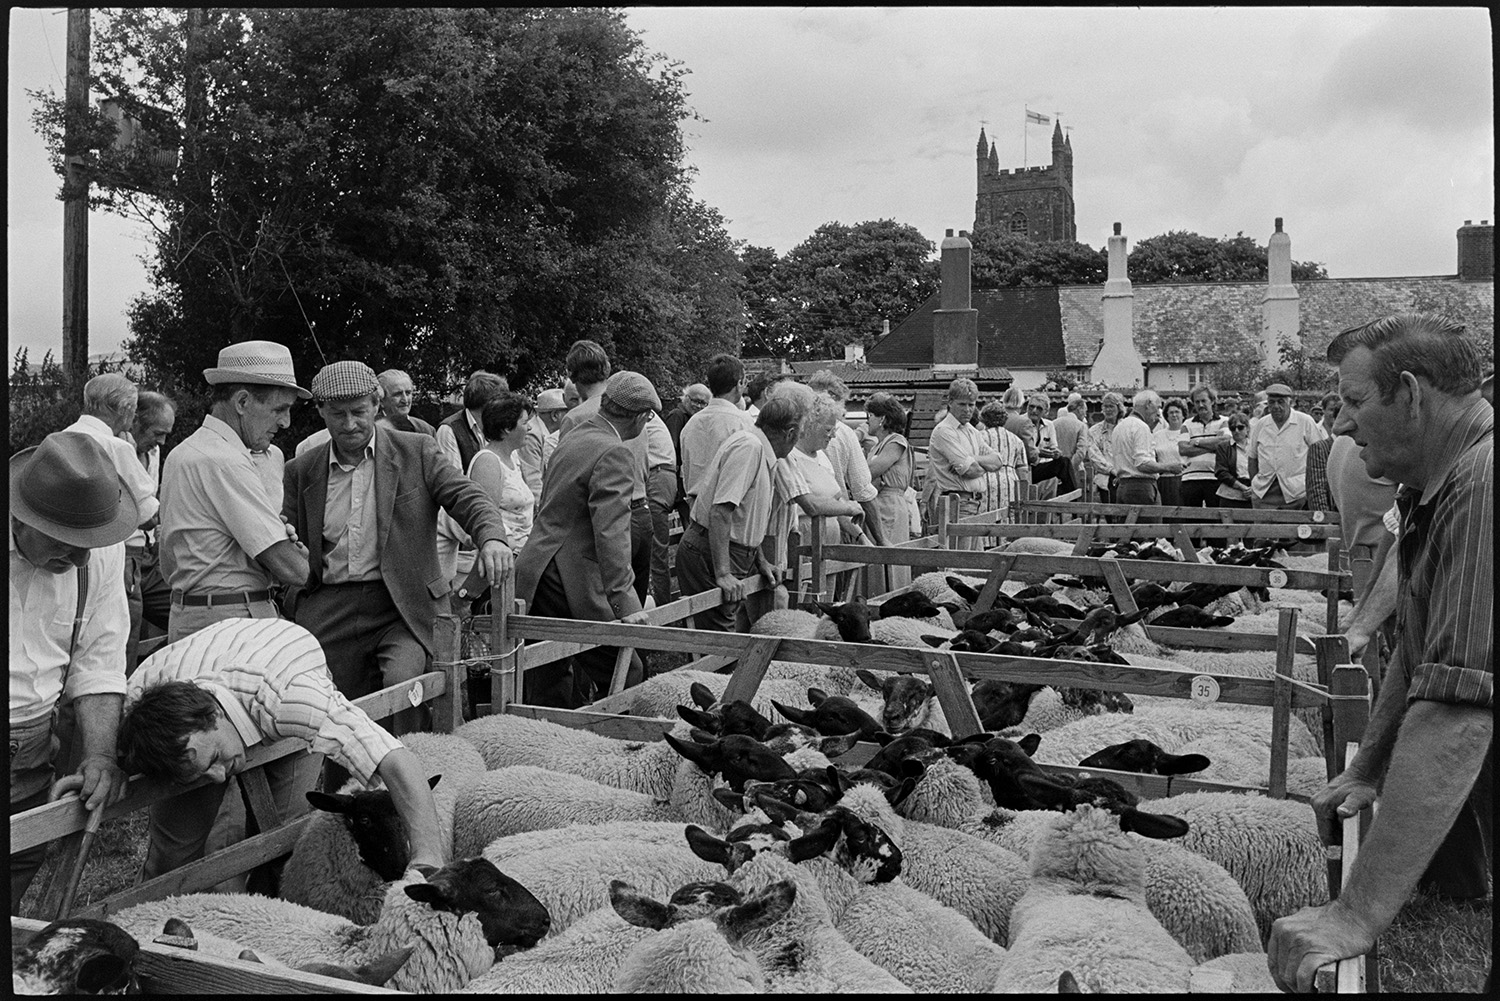 Fair, auction of sheep, farmers and crowds of spectators.
[A crowd of men and women standing around a row of wooden sheep pens containing black-faced sheep being sold at the Chulmleigh Fair. One of the men is inspecting a sheep. In the background the tower of the Church of St. Mary Magdalene, Chulmleigh can be seen.]